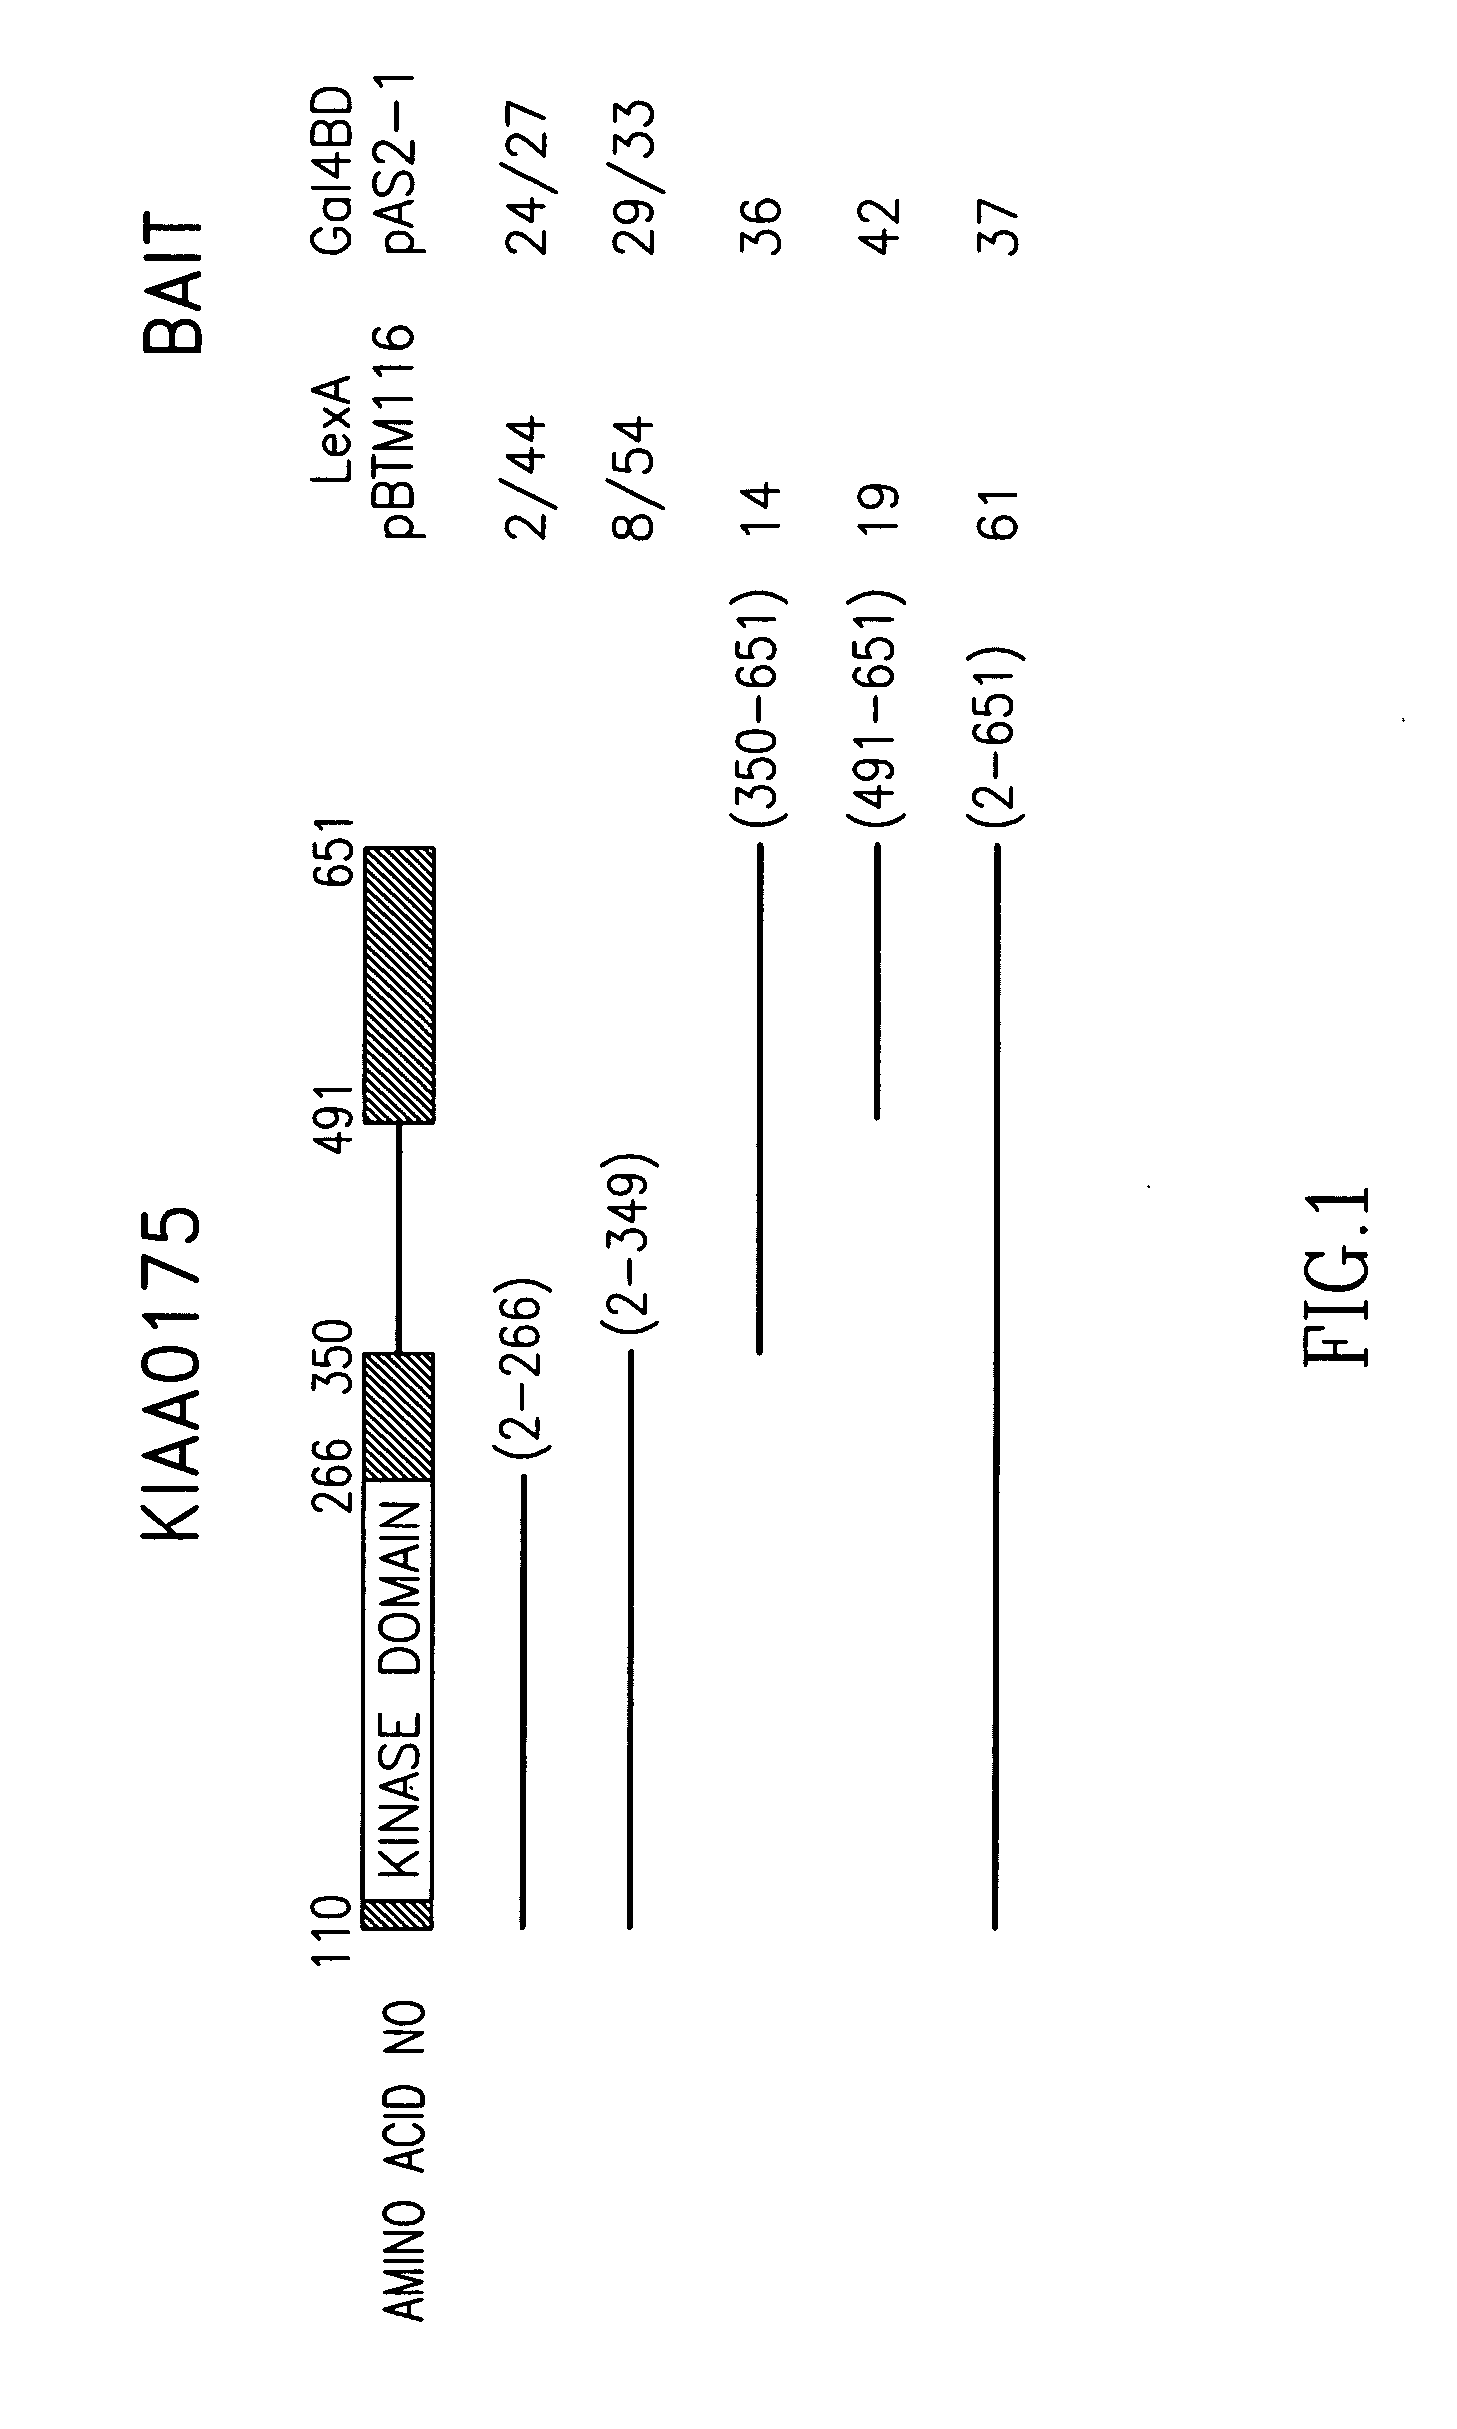 Compositions and methods for treating neoplastic disease using chemotherapy and radiation sensitizers